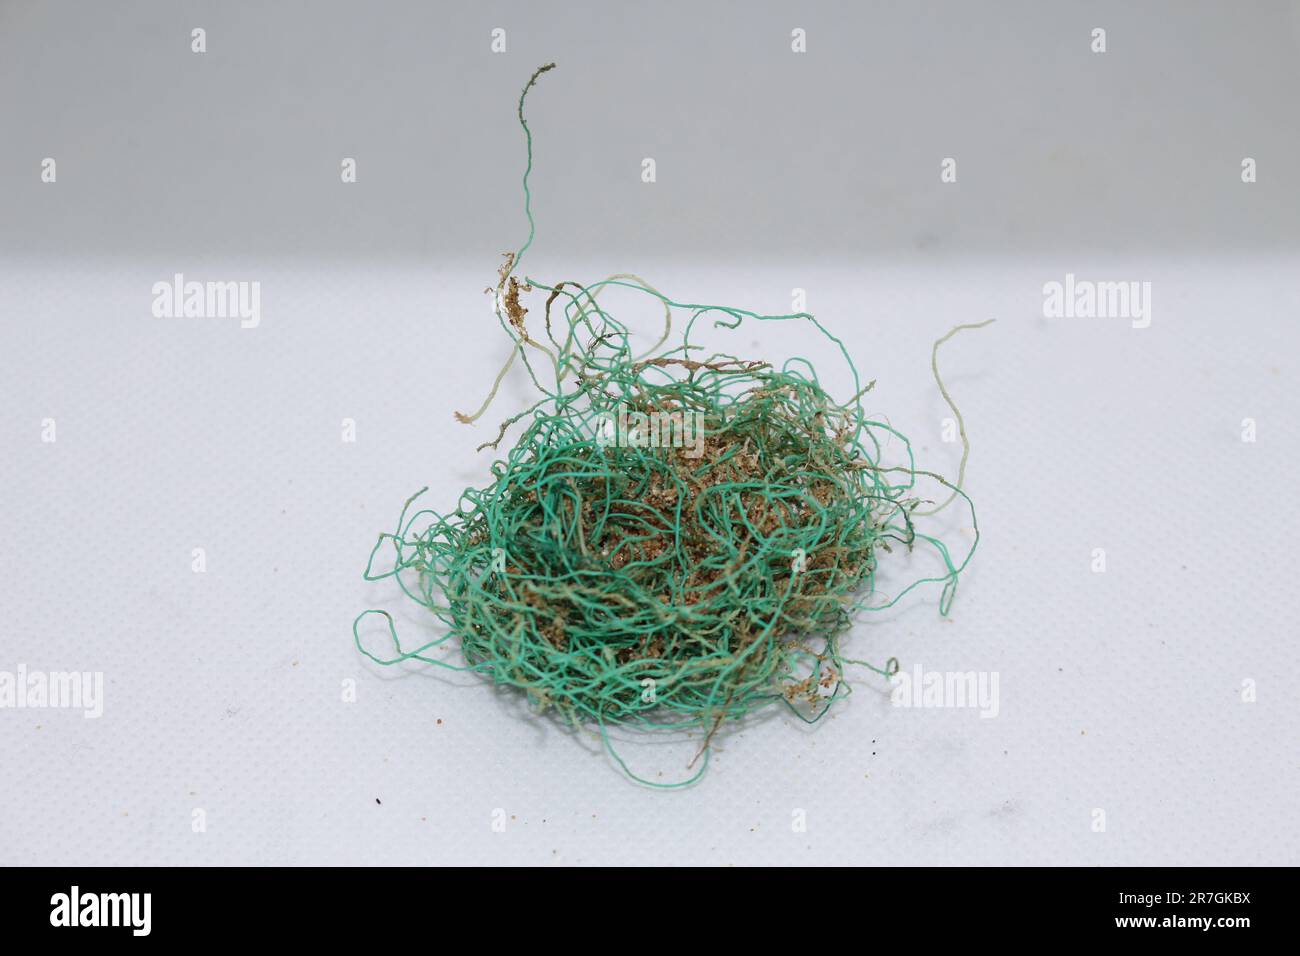 Long green knotted fishing line washed up ashore Stock Photo